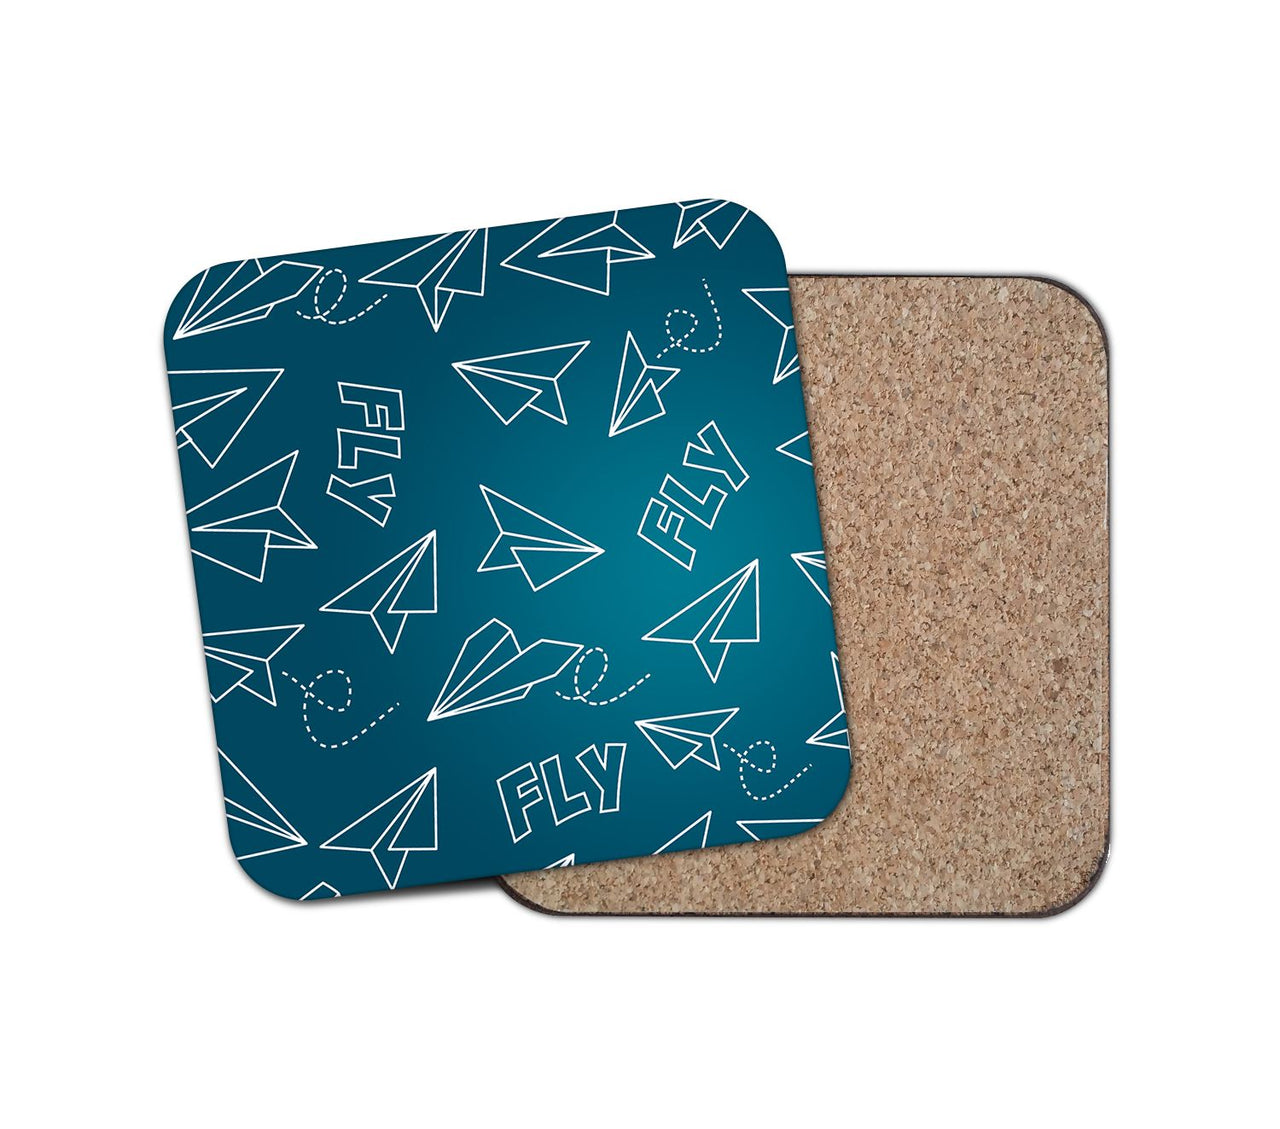 Paper Airplane & Fly Green Designed Coasters